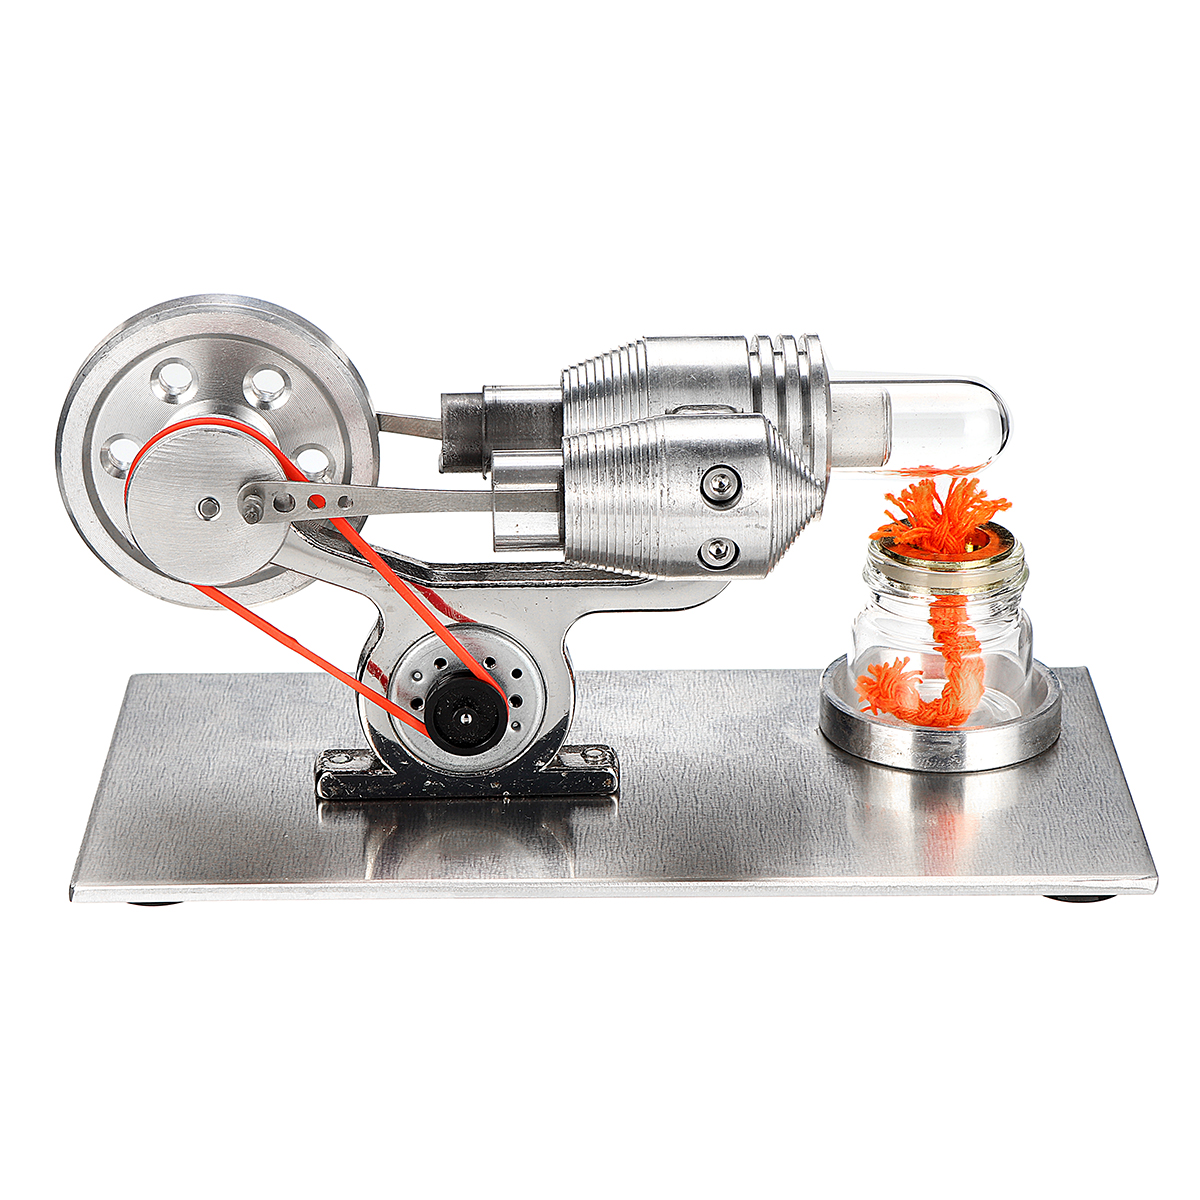 STEM-Stainless-Mini-Hot-Air-Stirling-Engine-Motor-Model-Educational-Toy-Kits-1363032